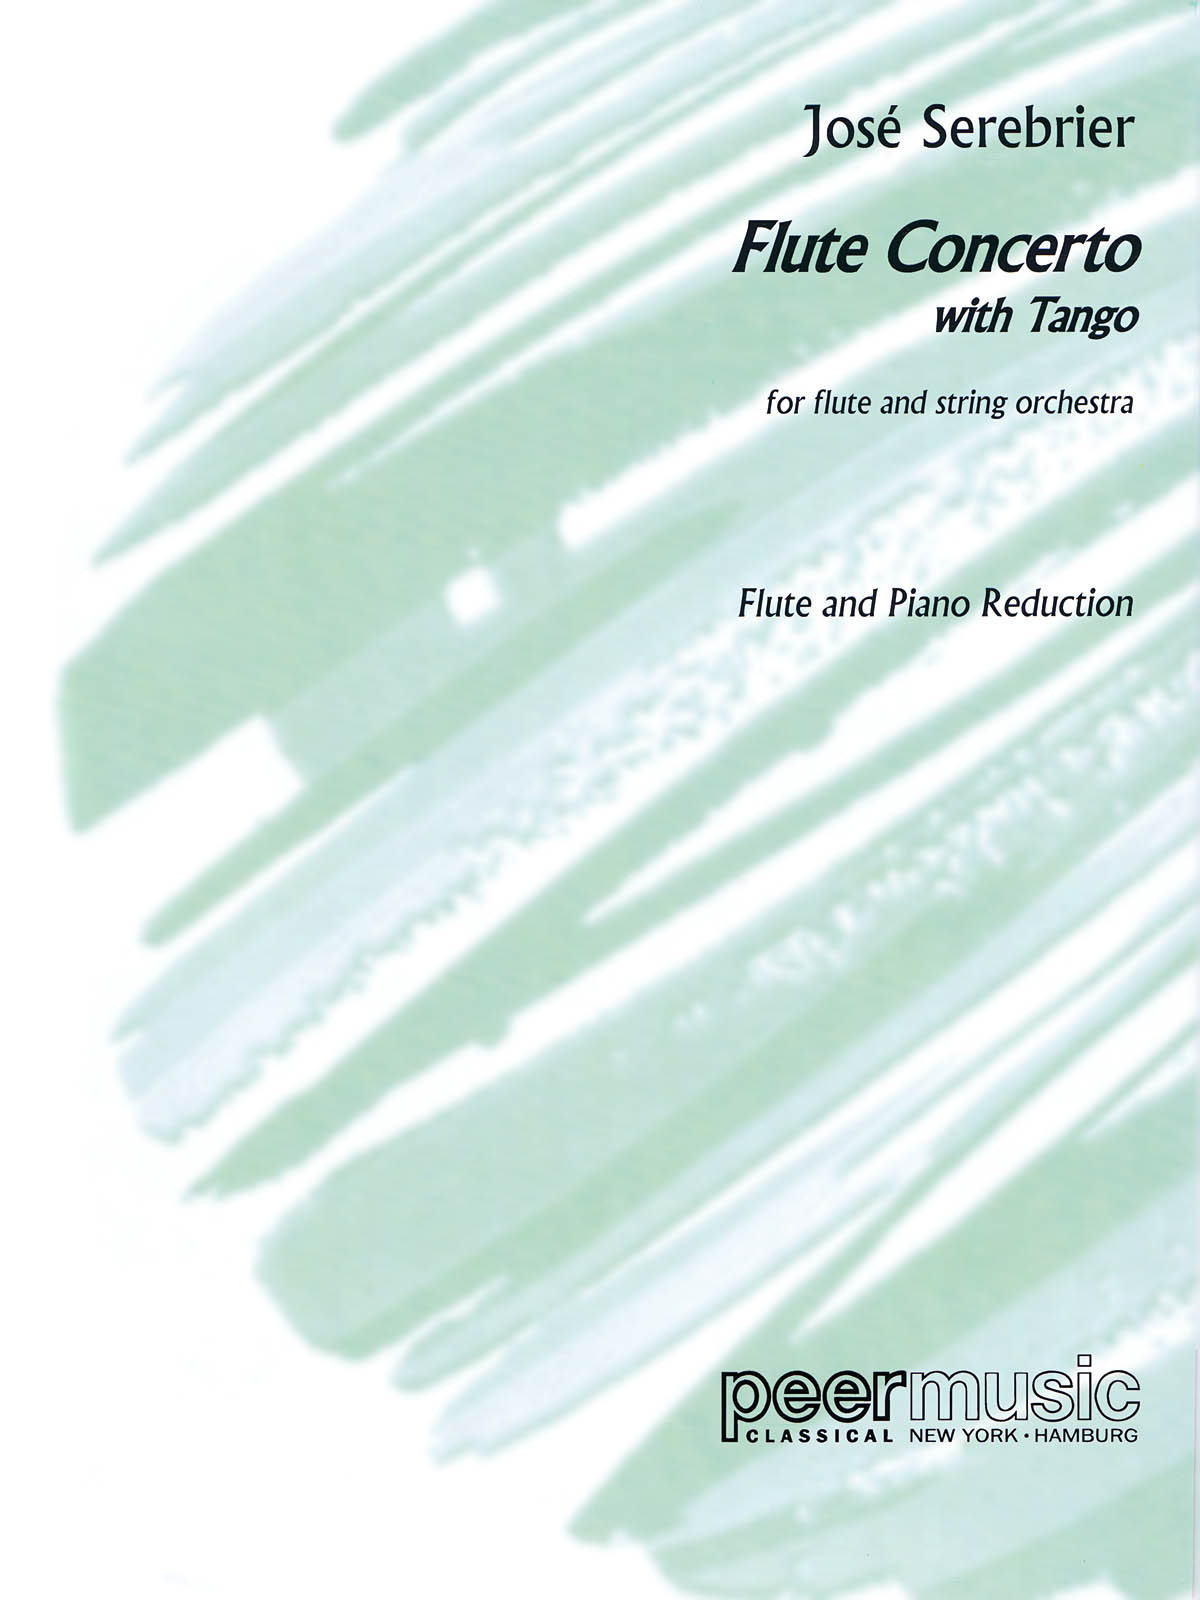 Flute Concerto with Tango